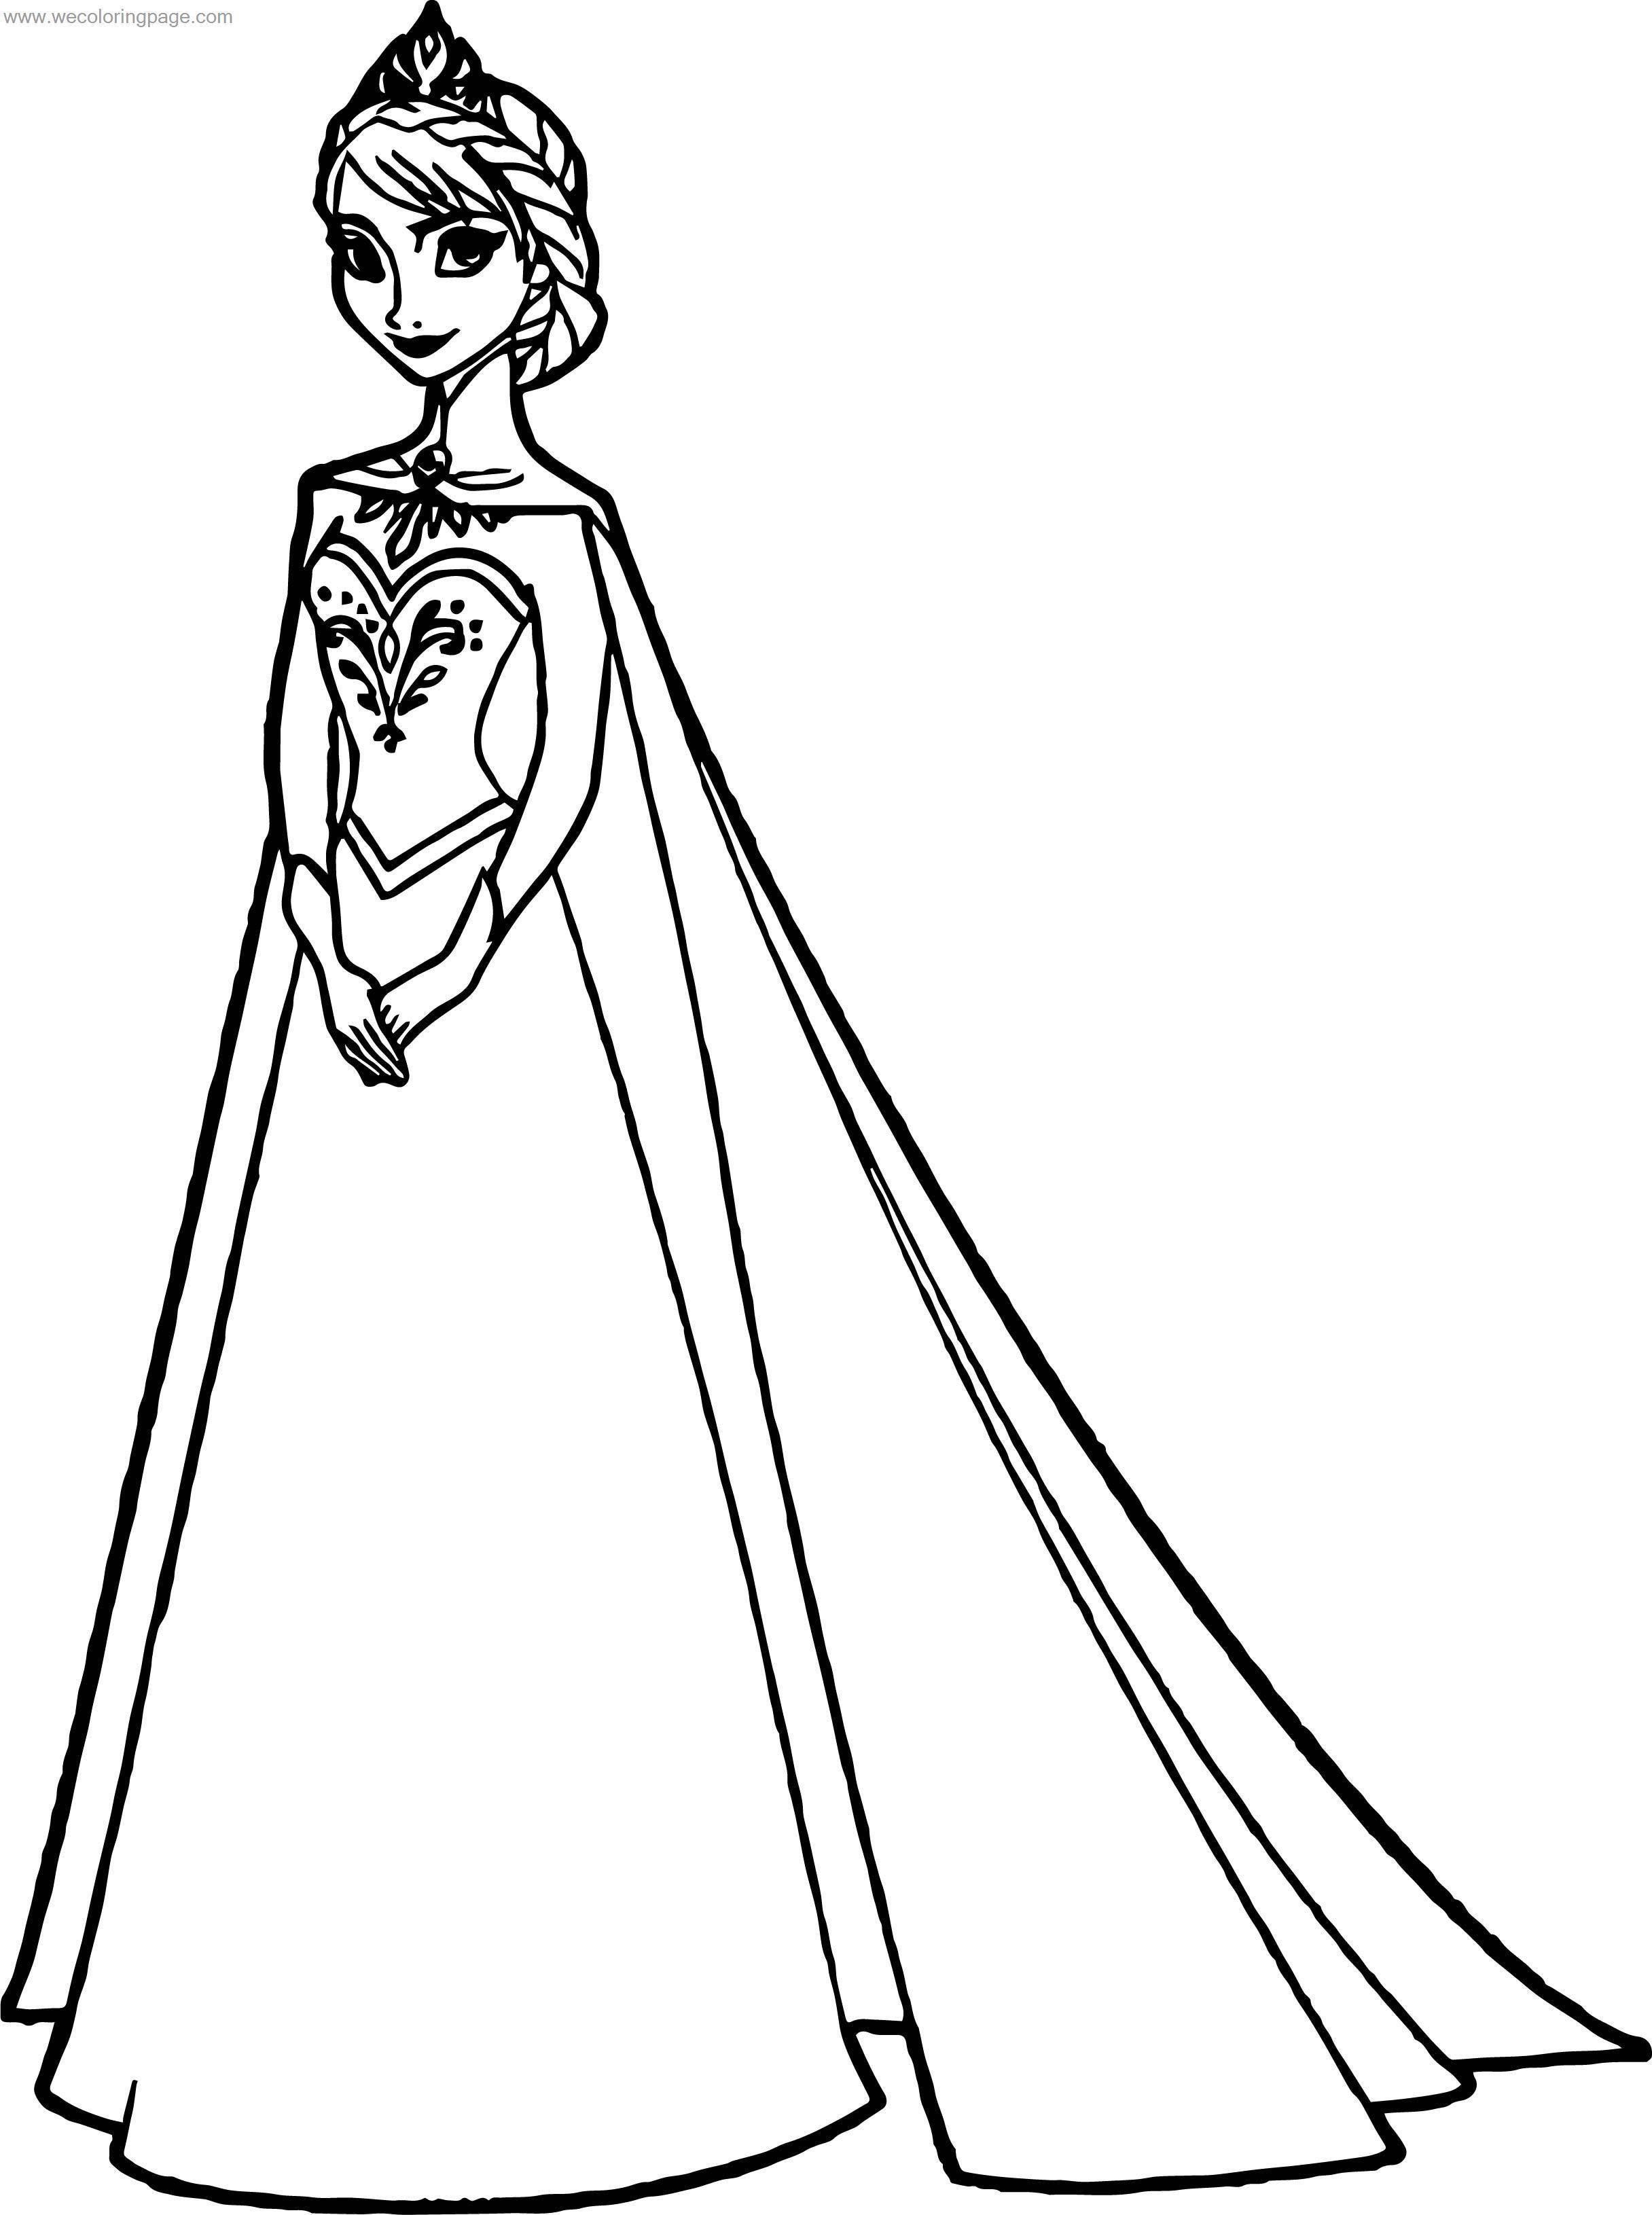 Elsa Coloring Pages Free Printable - Printable Templates